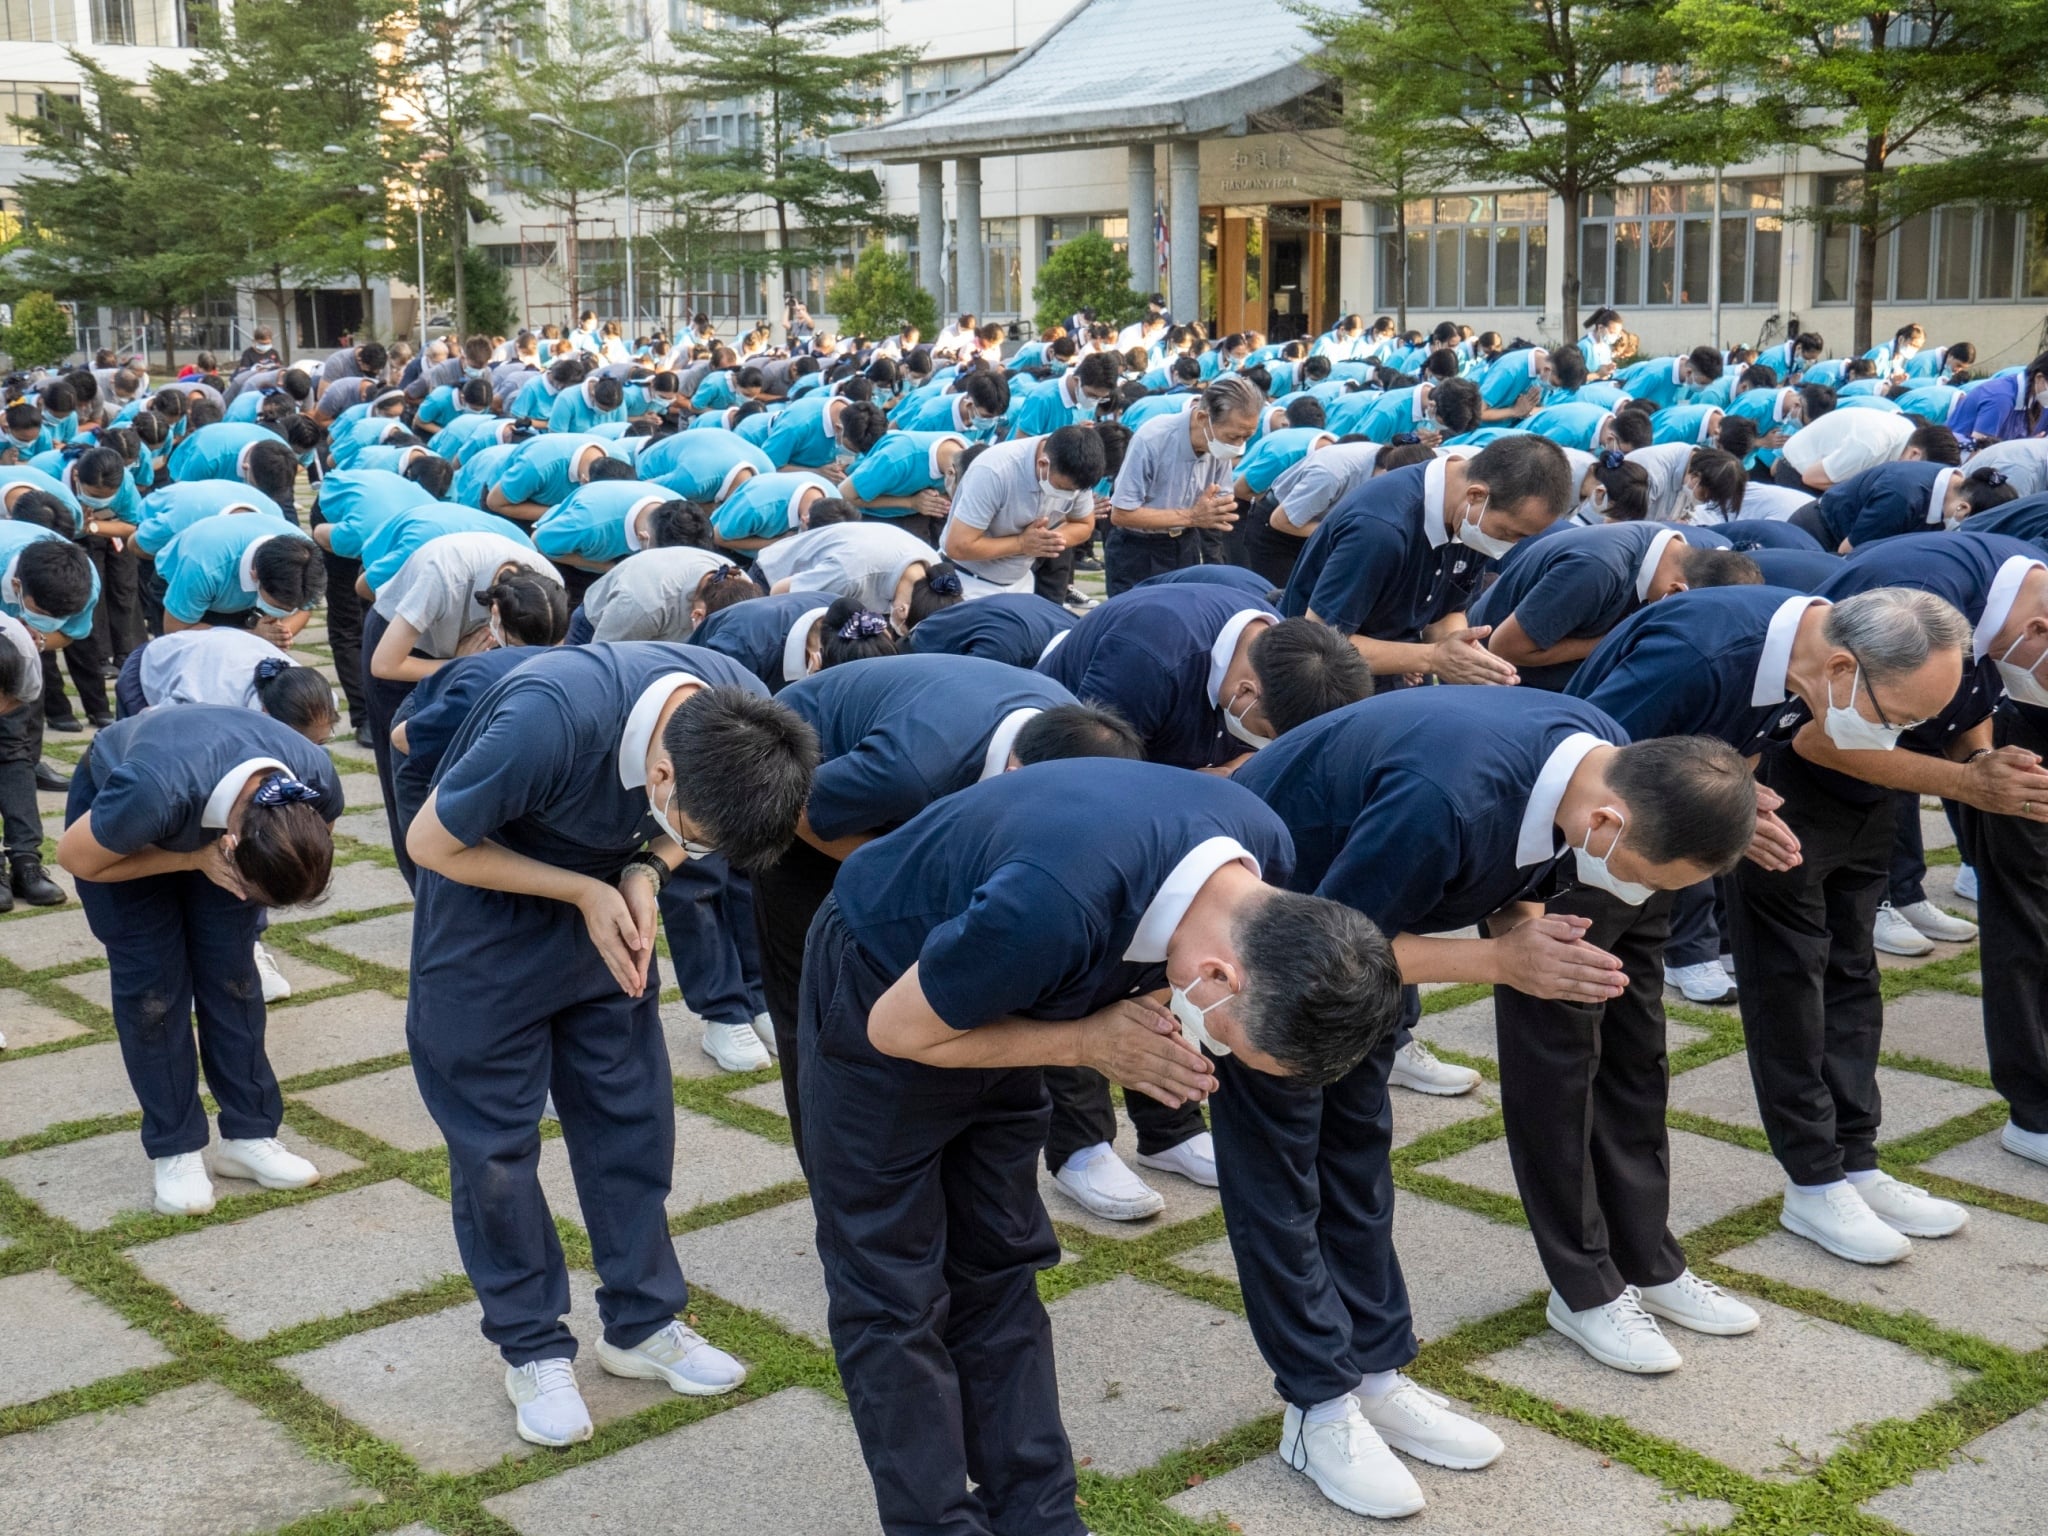 On November 4, Tzu Chi Foundation started its 29th anniversary in the Philippines with the solemn three steps and one bow ceremony at the grounds of Buddhist Tzu Chi Campus in Sta. Mesa, Manila. Commissioners, staffers, volunteers, scholars, and special guests participated in the dawn ritual.【Photo by Matt Serrano】